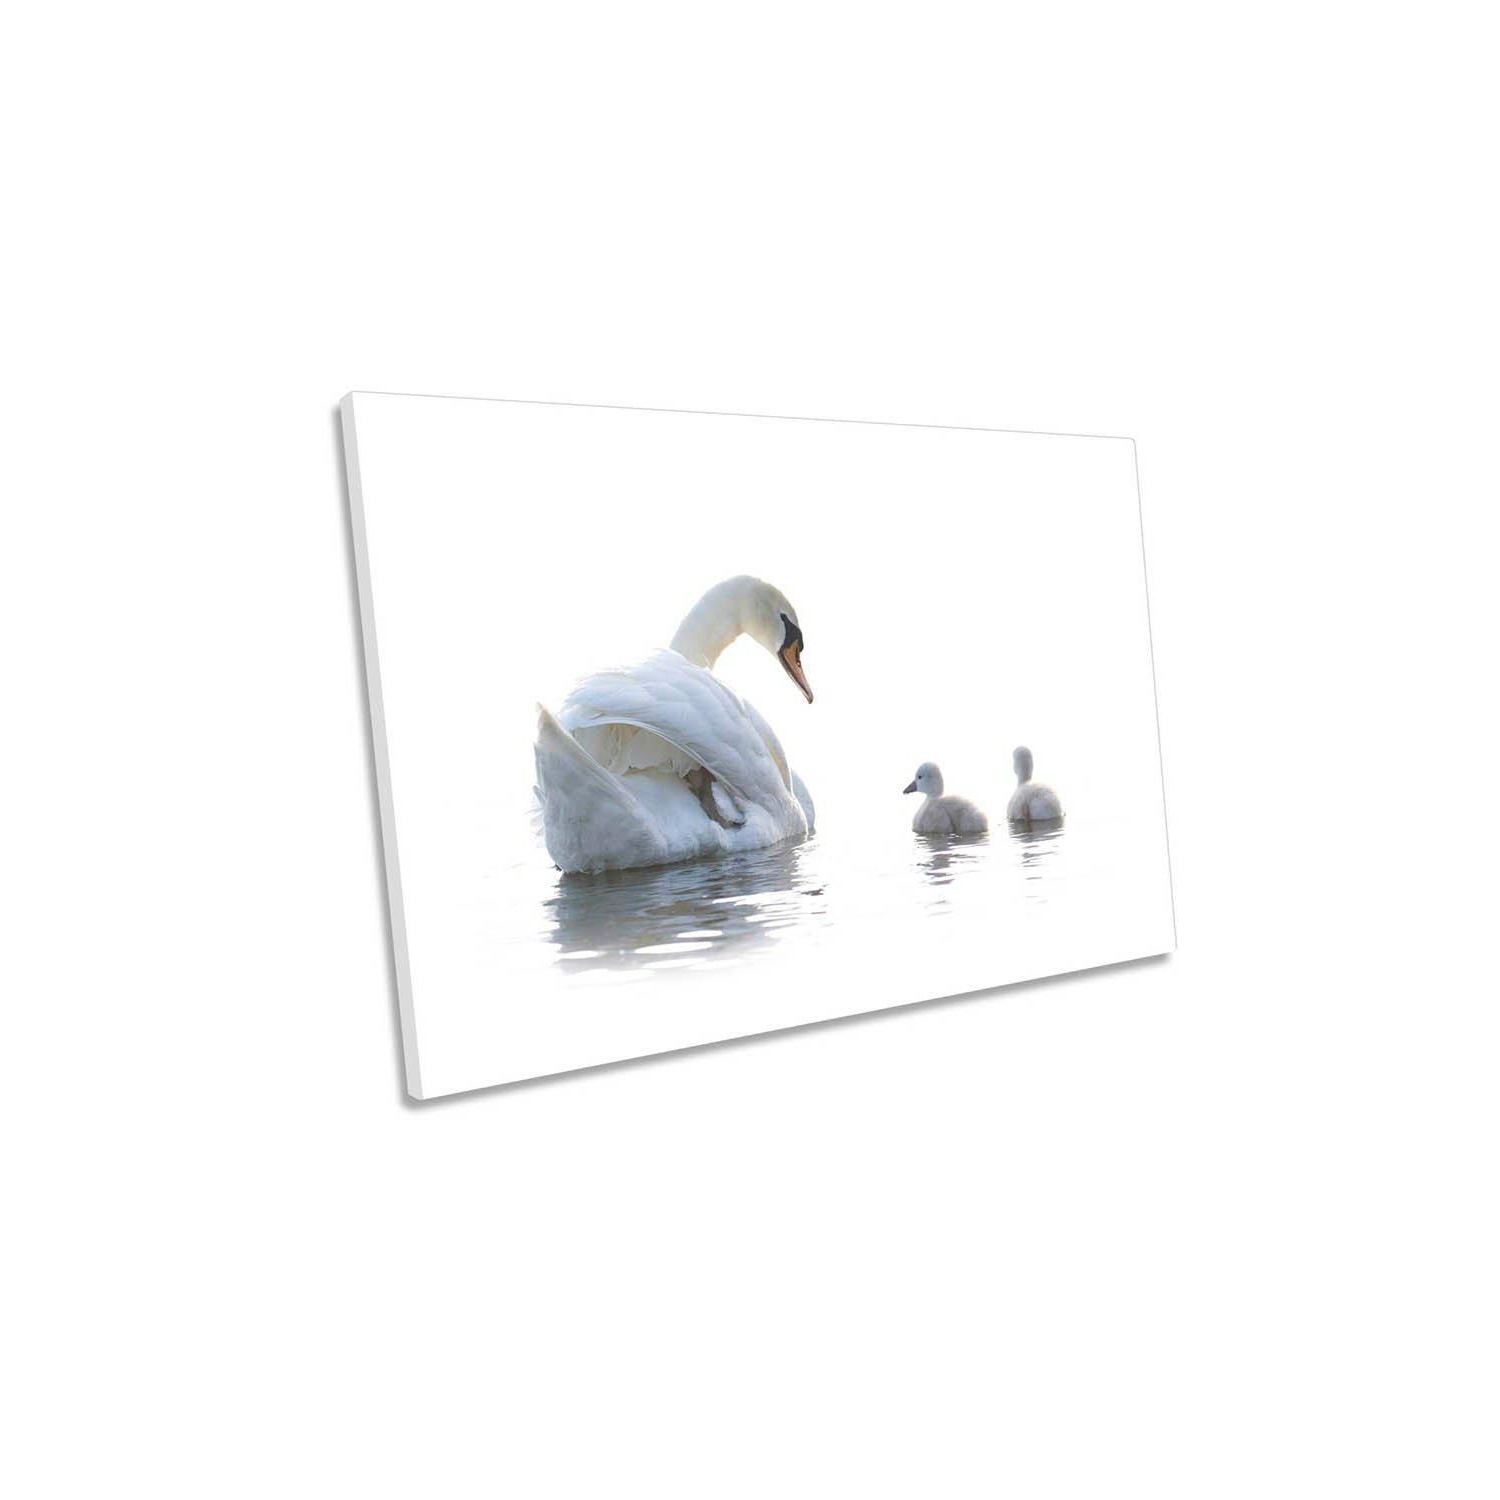 Mother Swan Ducklings Family Canvas Wall Art Picture Print - image 1